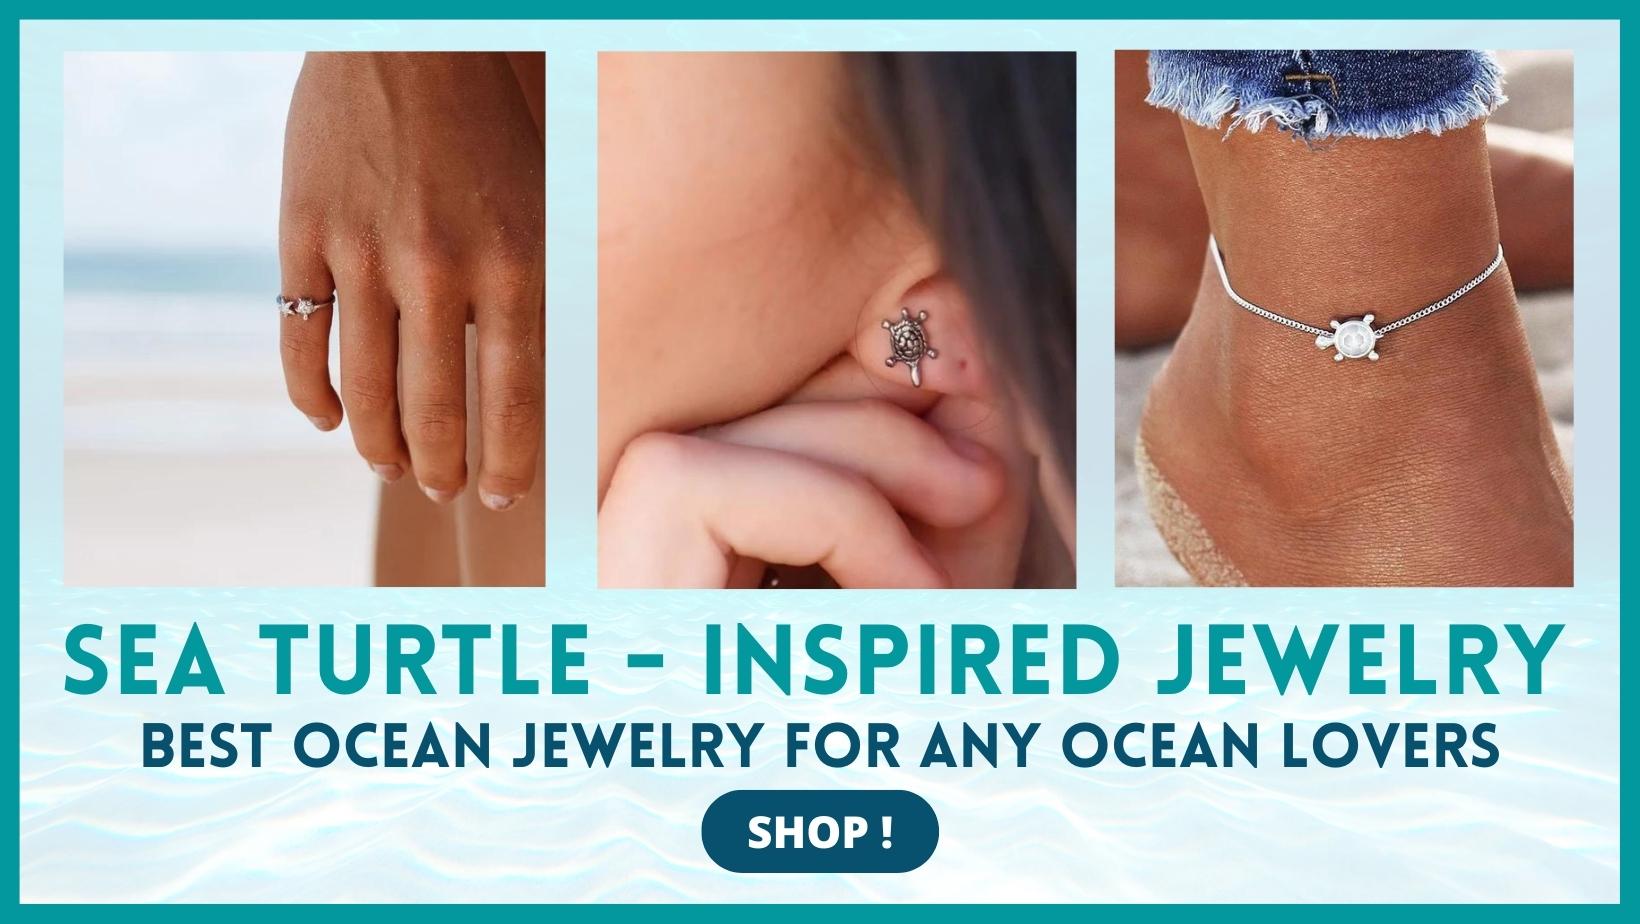 Elegant gifts for sea turtle lovers